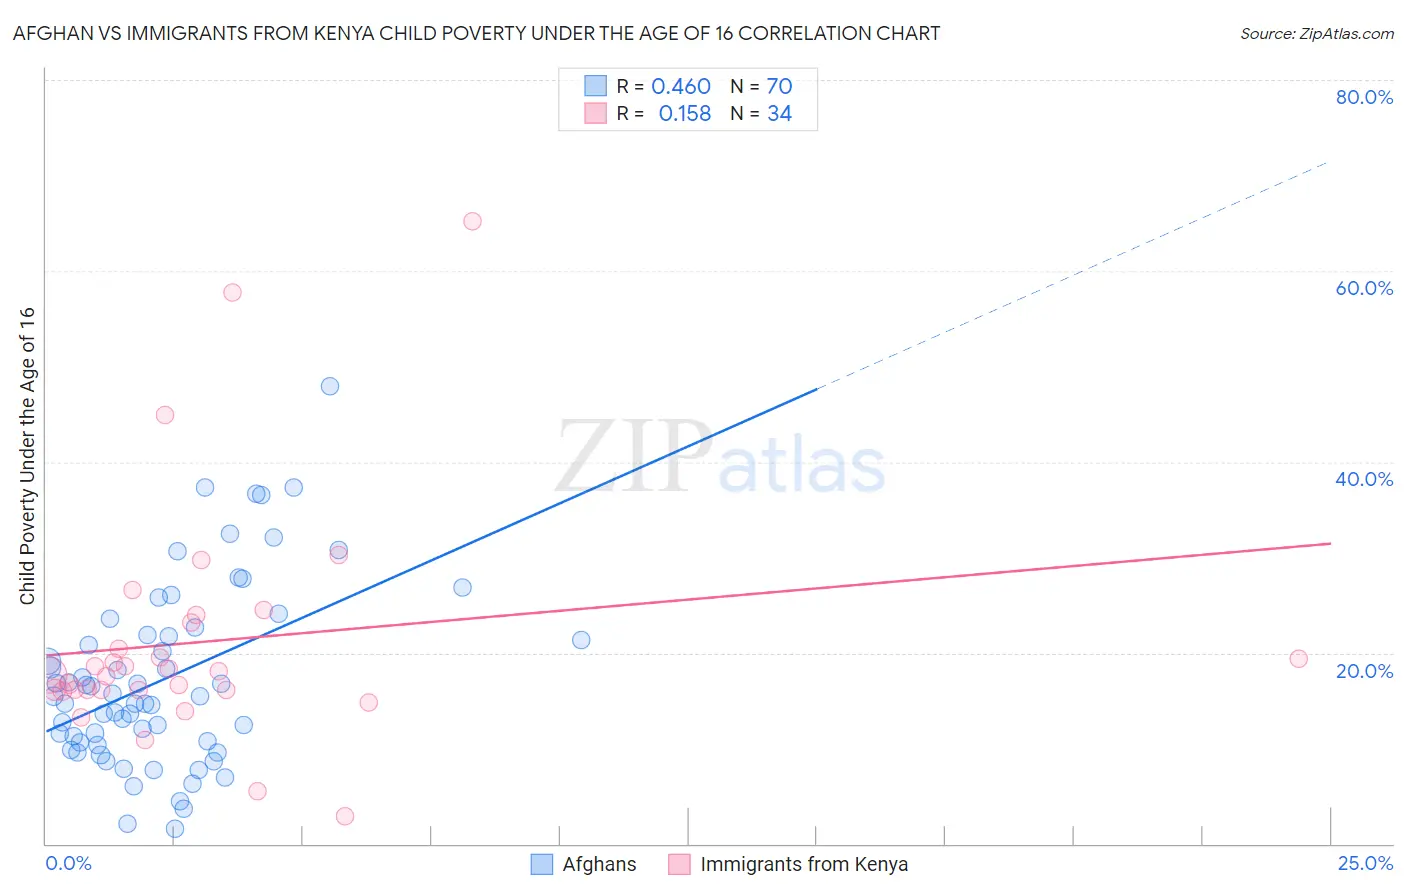 Afghan vs Immigrants from Kenya Child Poverty Under the Age of 16